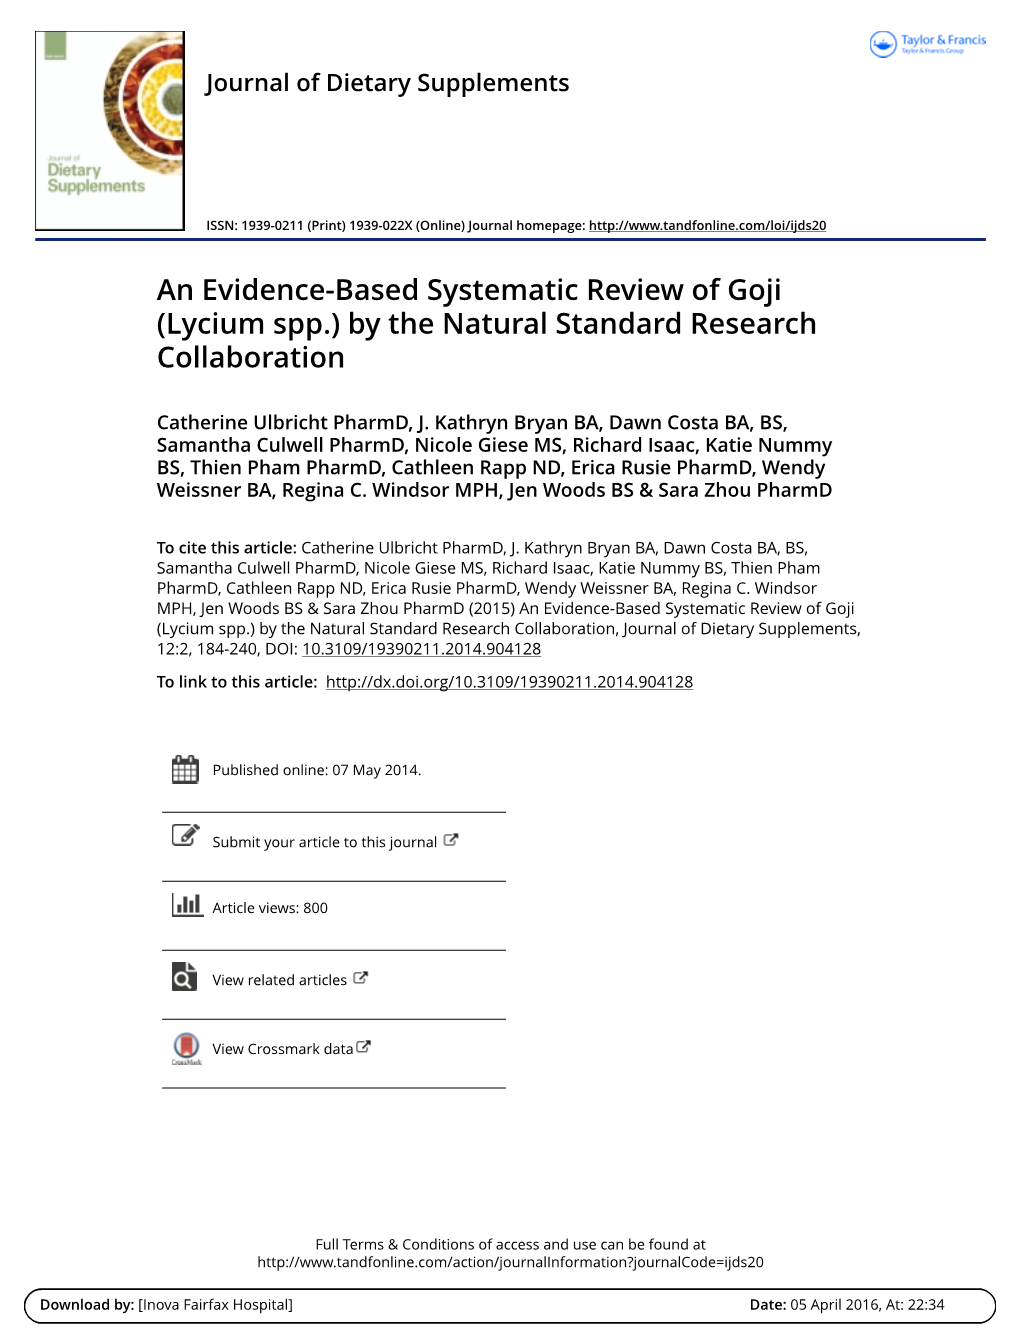 An Evidence-Based Systematic Review of Goji (Lycium Spp.) by the Natural Standard Research Collaboration